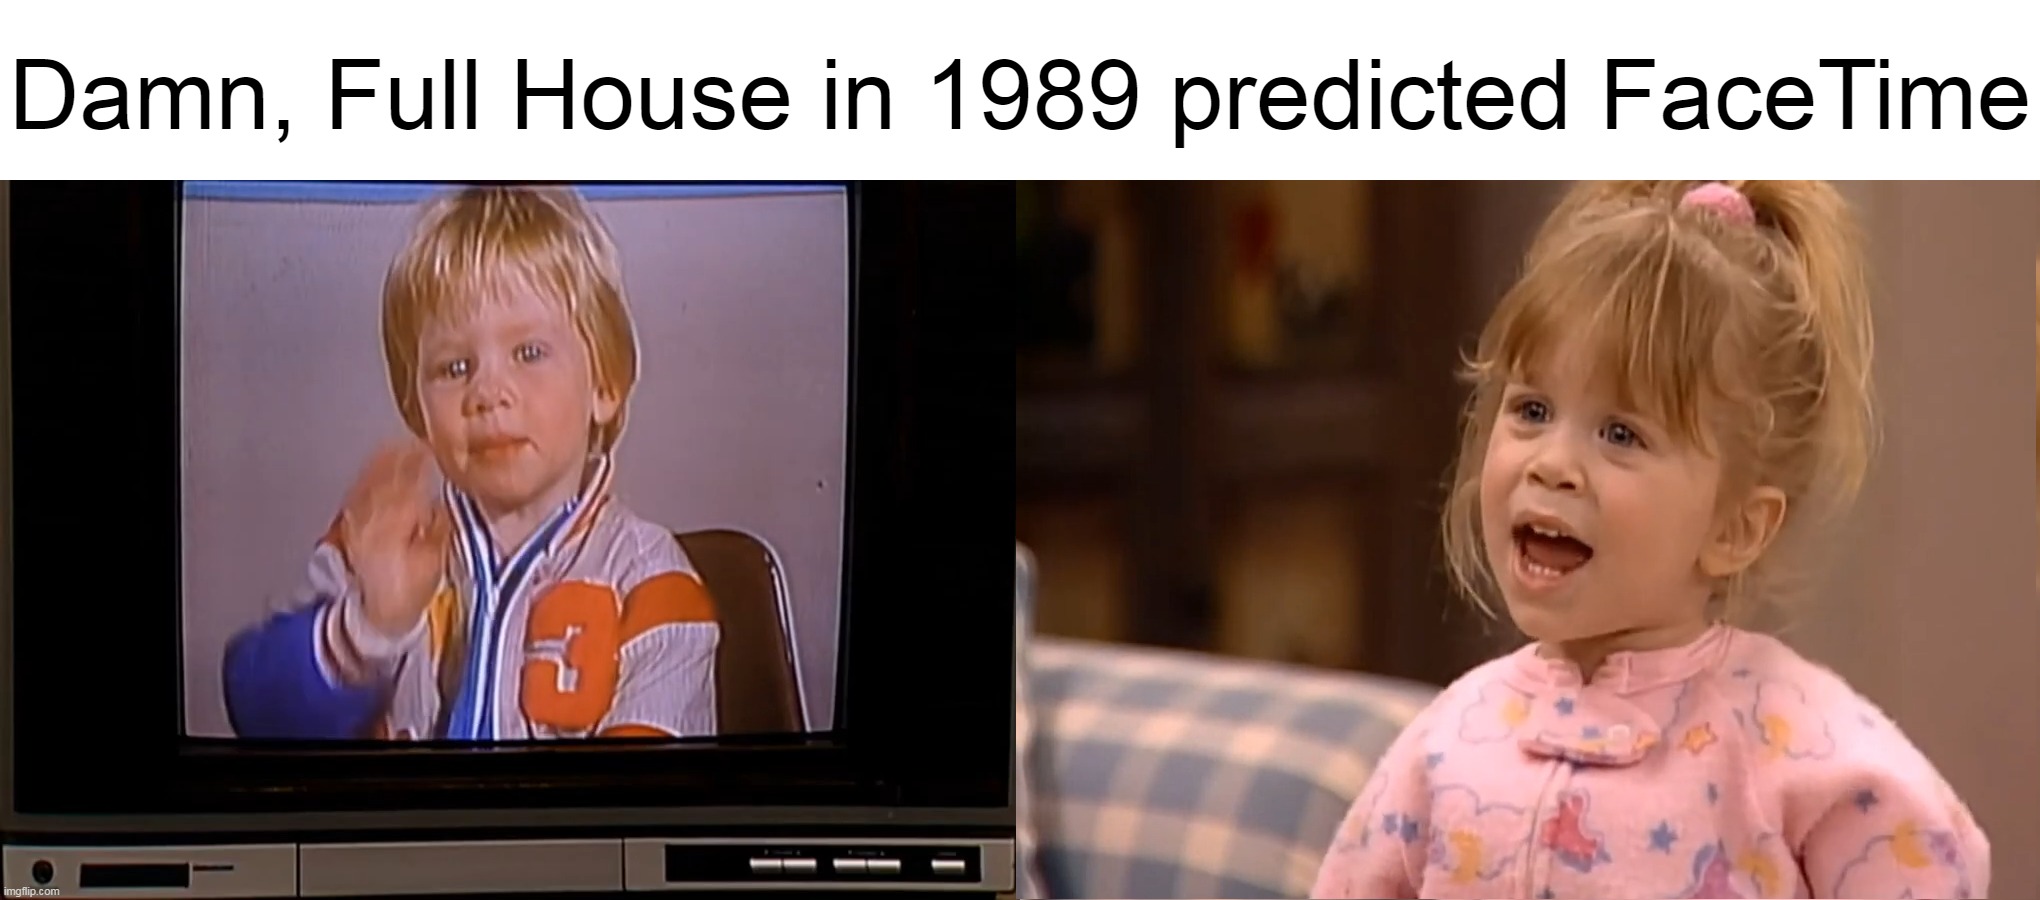 Howie Really Do It |  Damn, Full House in 1989 predicted FaceTime | image tagged in meme,memes,humor,facetime,prediction | made w/ Imgflip meme maker